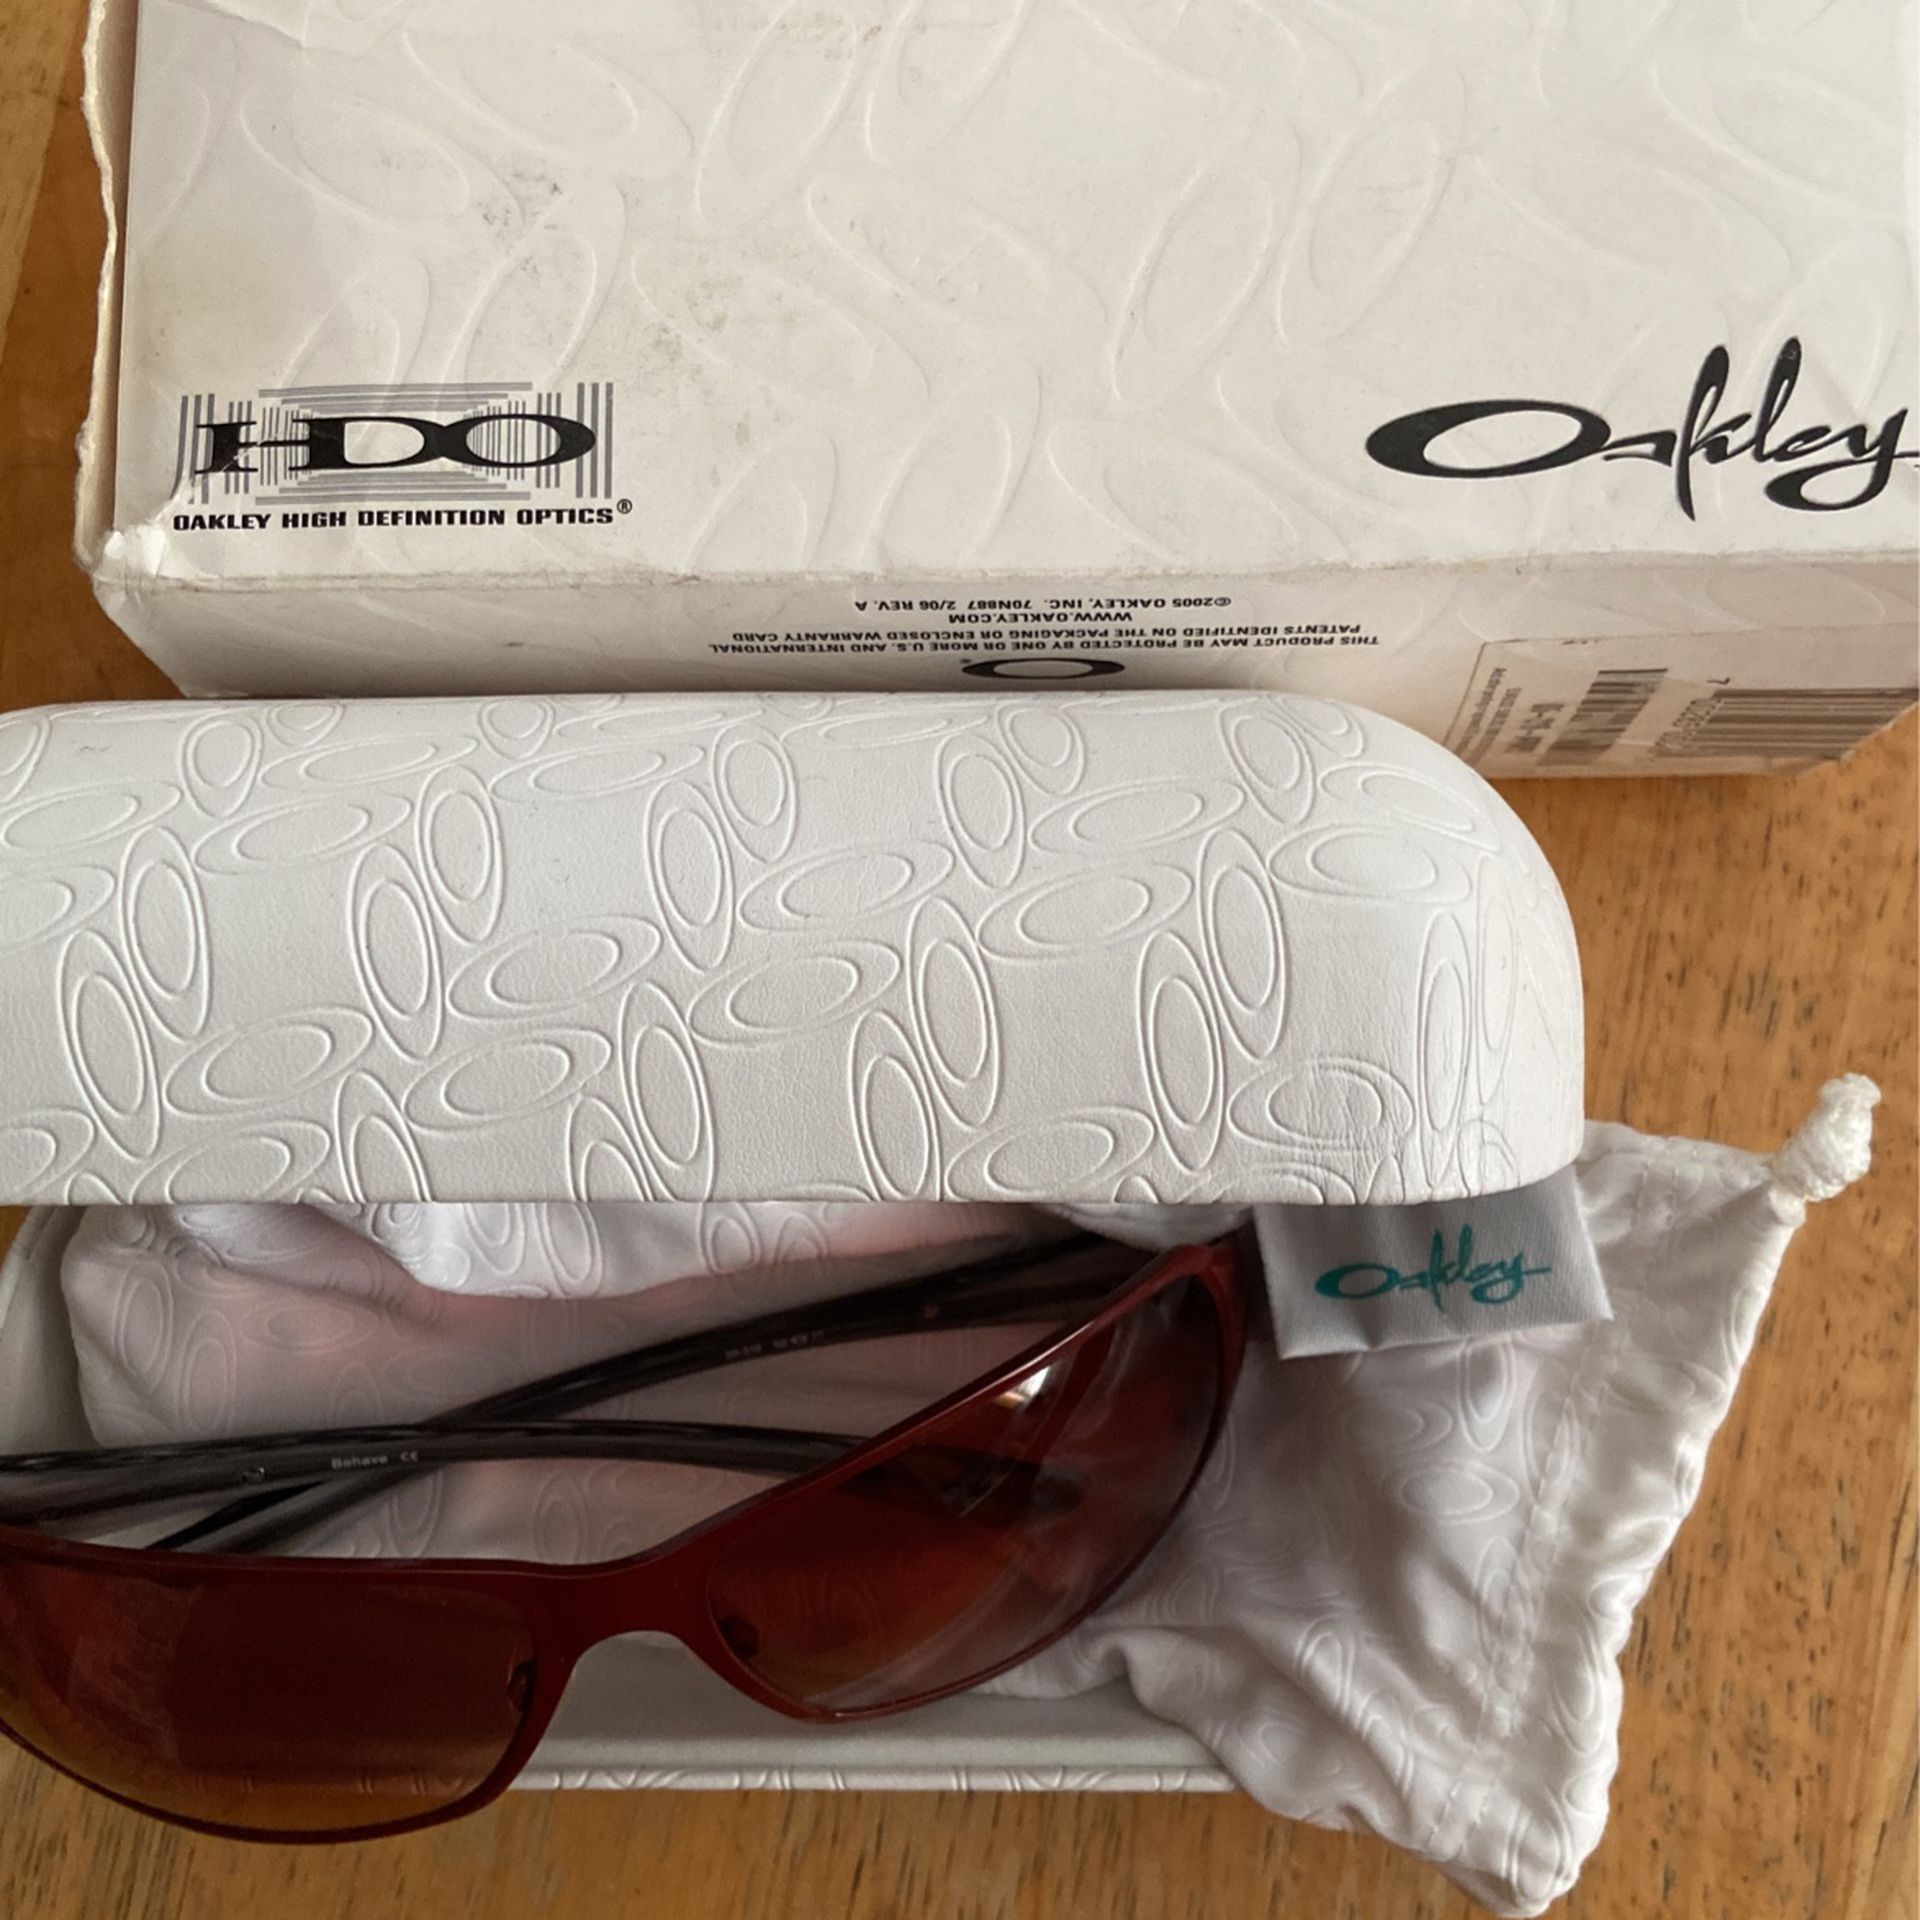 Oakley Sunglasses for Sale in Los Angeles, CA - OfferUp